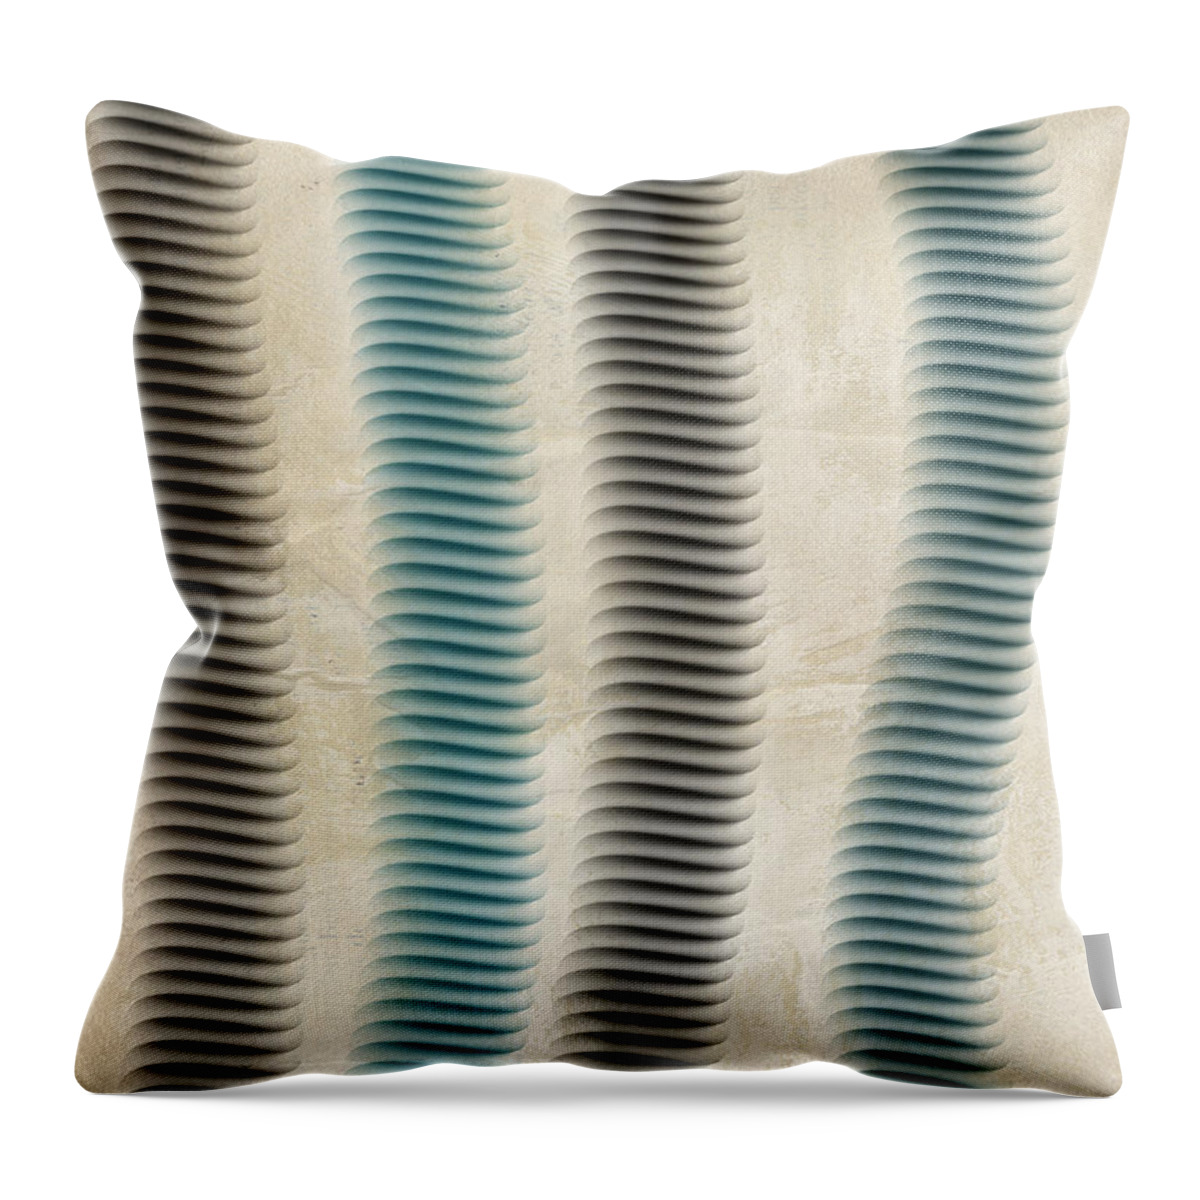 Abstract Throw Pillow featuring the digital art Recoil by Bonnie Bruno